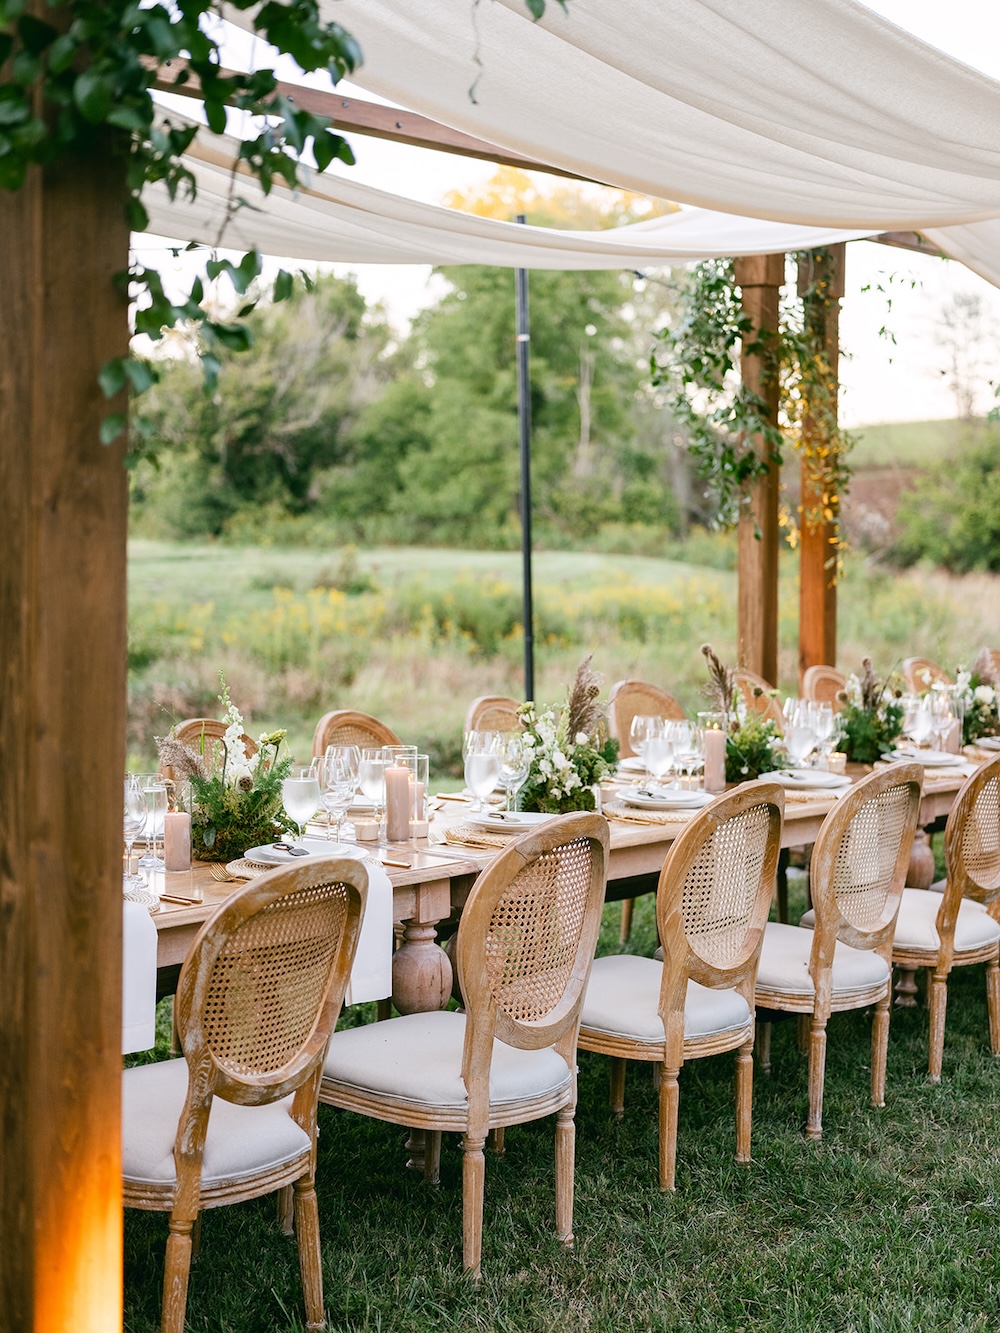 Boho chic table design, rattan chairs, farmhouse style tables, small centerpieces. Milestone birthday party celebration weekend in Middleburg, Virginia. Sarah Bradshaw Photography.